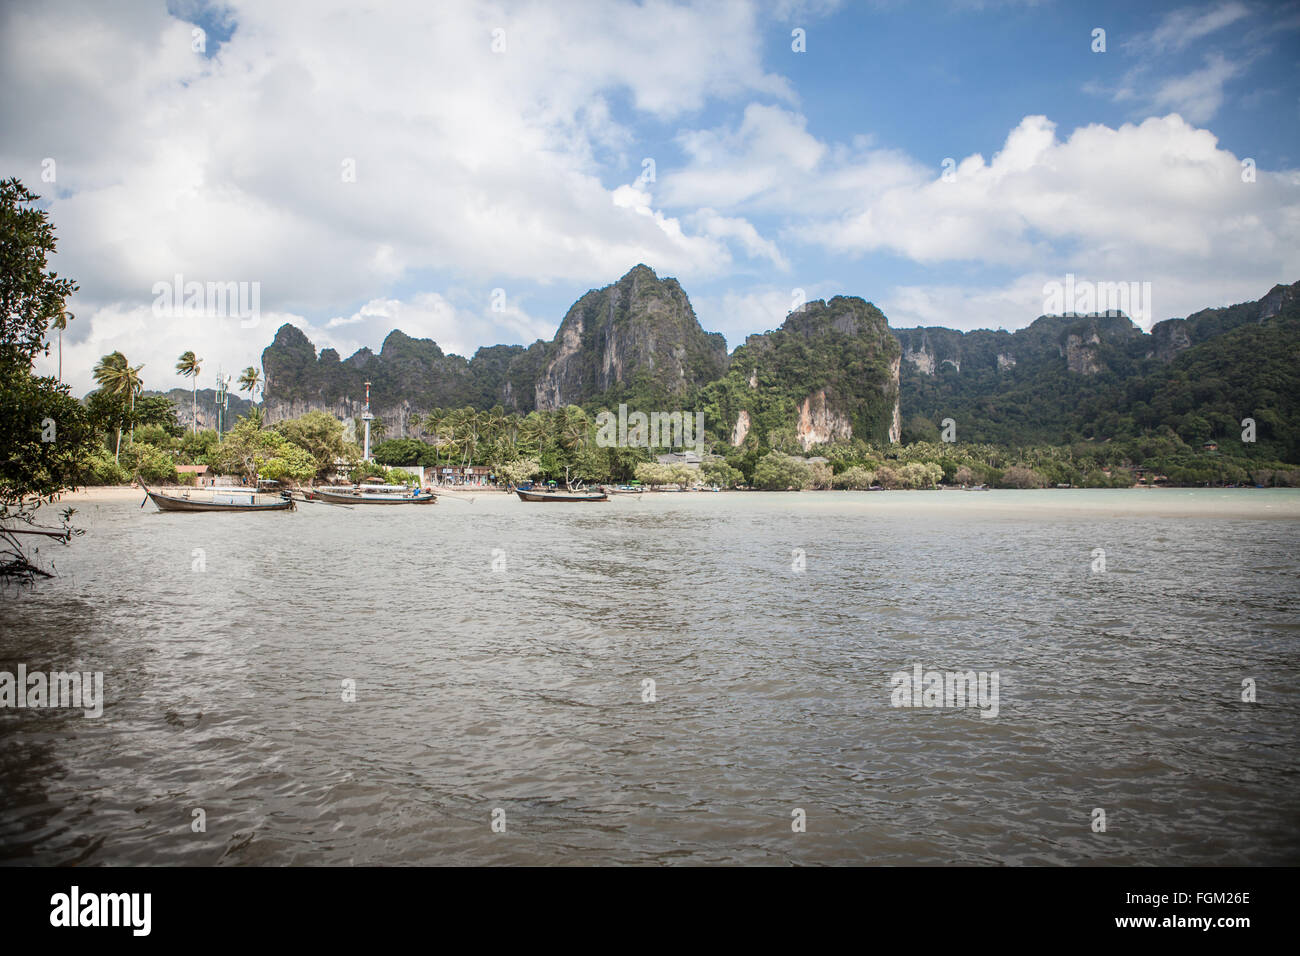 Boat and limestone cliffs in Railay, Krabi Province, Thailand Stock Photo